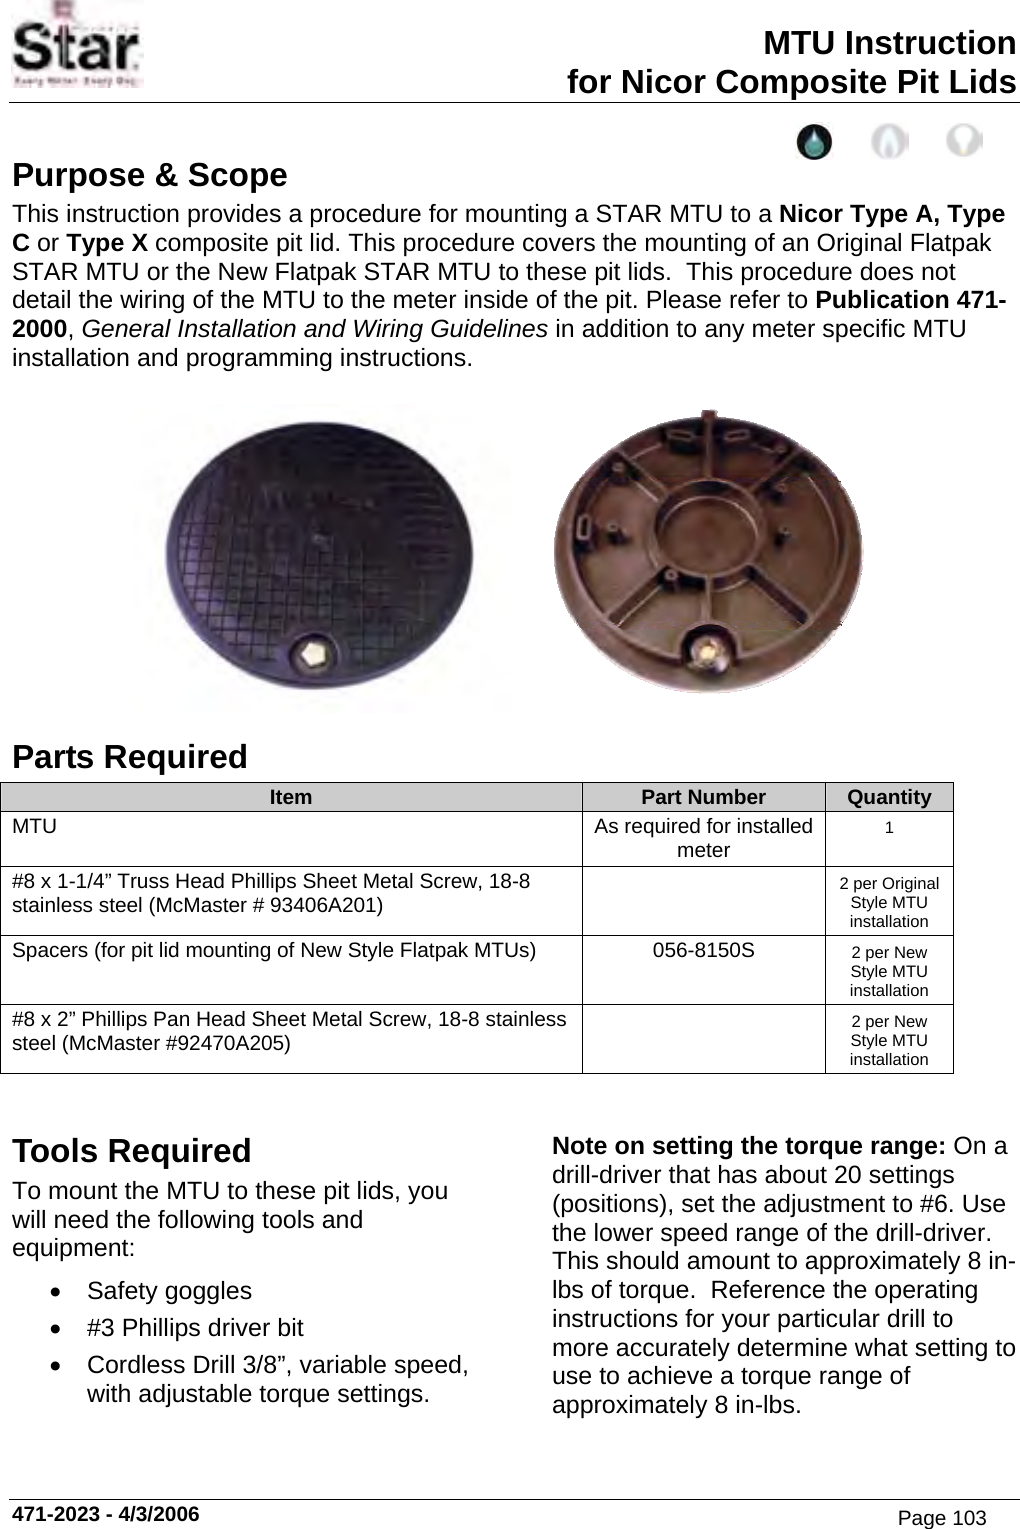 MTU Instruction for Nicor Composite Pit Lids Purpose &amp; Scope This instruction provides a procedure for mounting a STAR MTU to a Nicor Type A, Type C or Type X composite pit lid. This procedure covers the mounting of an Original Flatpak STAR MTU or the New Flatpak STAR MTU to these pit lids.  This procedure does not detail the wiring of the MTU to the meter inside of the pit. Please refer to Publication 471-2000, General Installation and Wiring Guidelines in addition to any meter specific MTU installation and programming instructions.    Parts Required Item  Part Number  Quantity MTU  As required for installed meter  1 #8 x 1-1/4” Truss Head Phillips Sheet Metal Screw, 18-8 stainless steel (McMaster # 93406A201)   2 per Original Style MTU installation Spacers (for pit lid mounting of New Style Flatpak MTUs)  056-8150S  2 per New Style MTU installation #8 x 2” Phillips Pan Head Sheet Metal Screw, 18-8 stainless steel (McMaster #92470A205)   2 per New Style MTU installation   Tools Required To mount the MTU to these pit lids, you will need the following tools and equipment: • Safety goggles •  #3 Phillips driver bit •  Cordless Drill 3/8”, variable speed, with adjustable torque settings. Note on setting the torque range: On a drill-driver that has about 20 settings (positions), set the adjustment to #6. Use the lower speed range of the drill-driver. This should amount to approximately 8 in-lbs of torque.  Reference the operating instructions for your particular drill to more accurately determine what setting to use to achieve a torque range of approximately 8 in-lbs. 471-2023 - 4/3/2006 Page 103